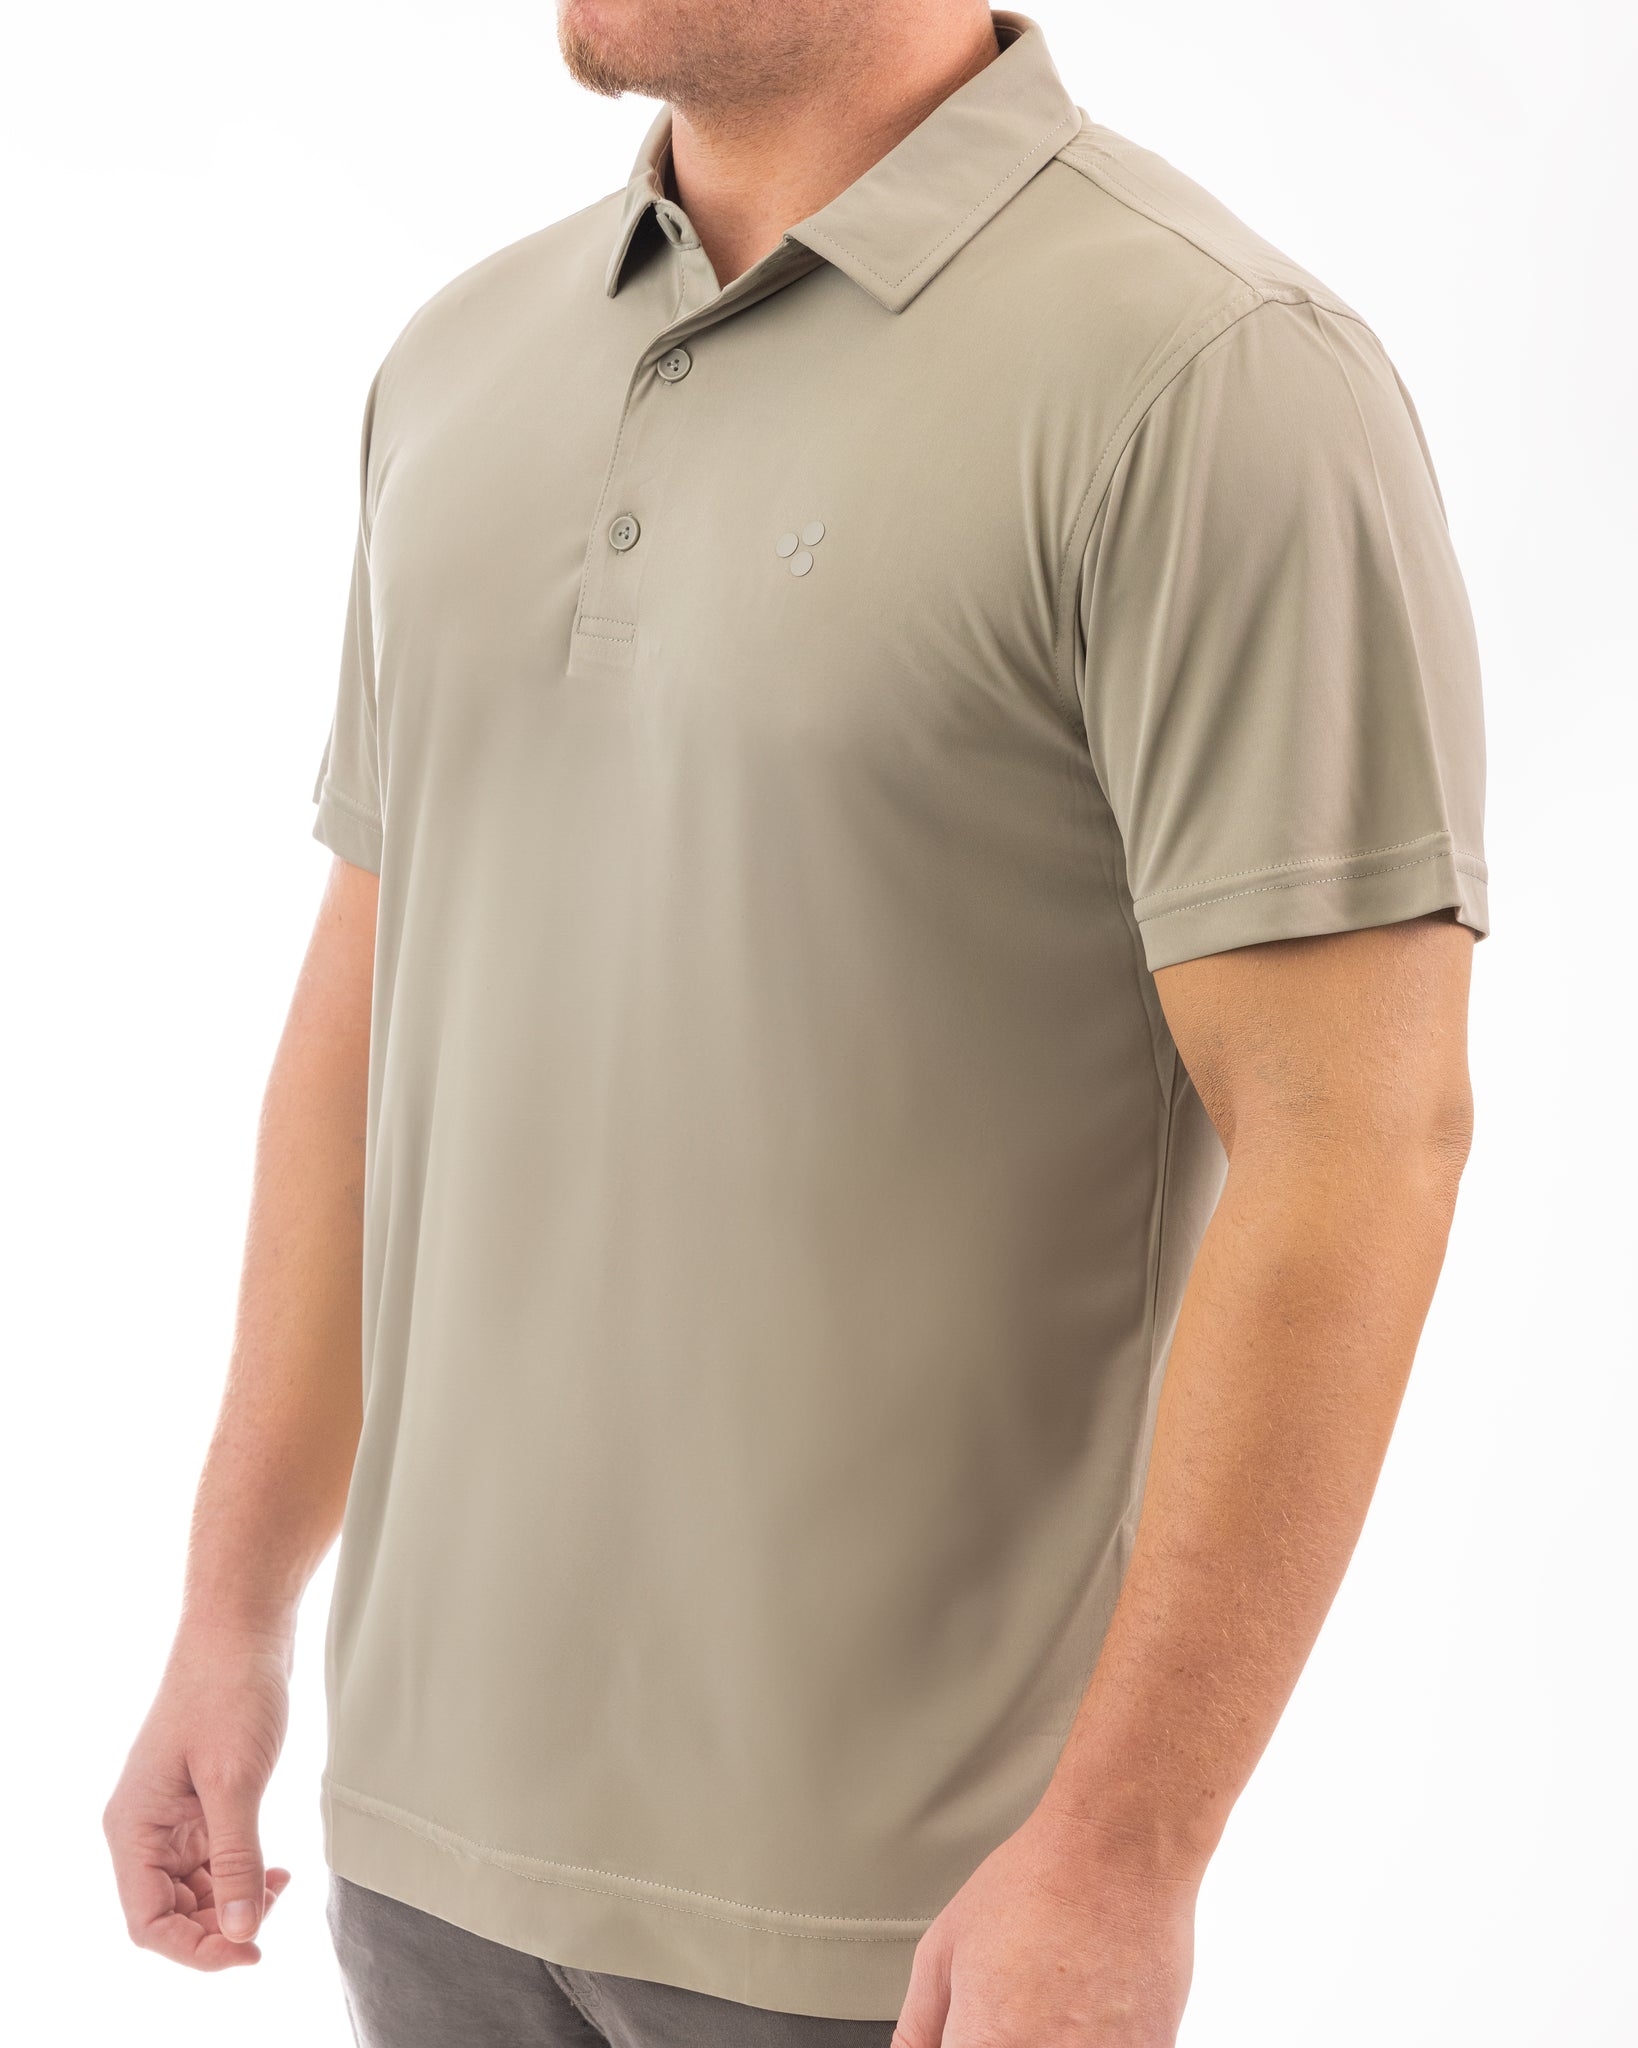 This is a high performing golf polo with a tan color to it. It’s got 4-way stretch, breathable, moisture wicking, uv protected and more.